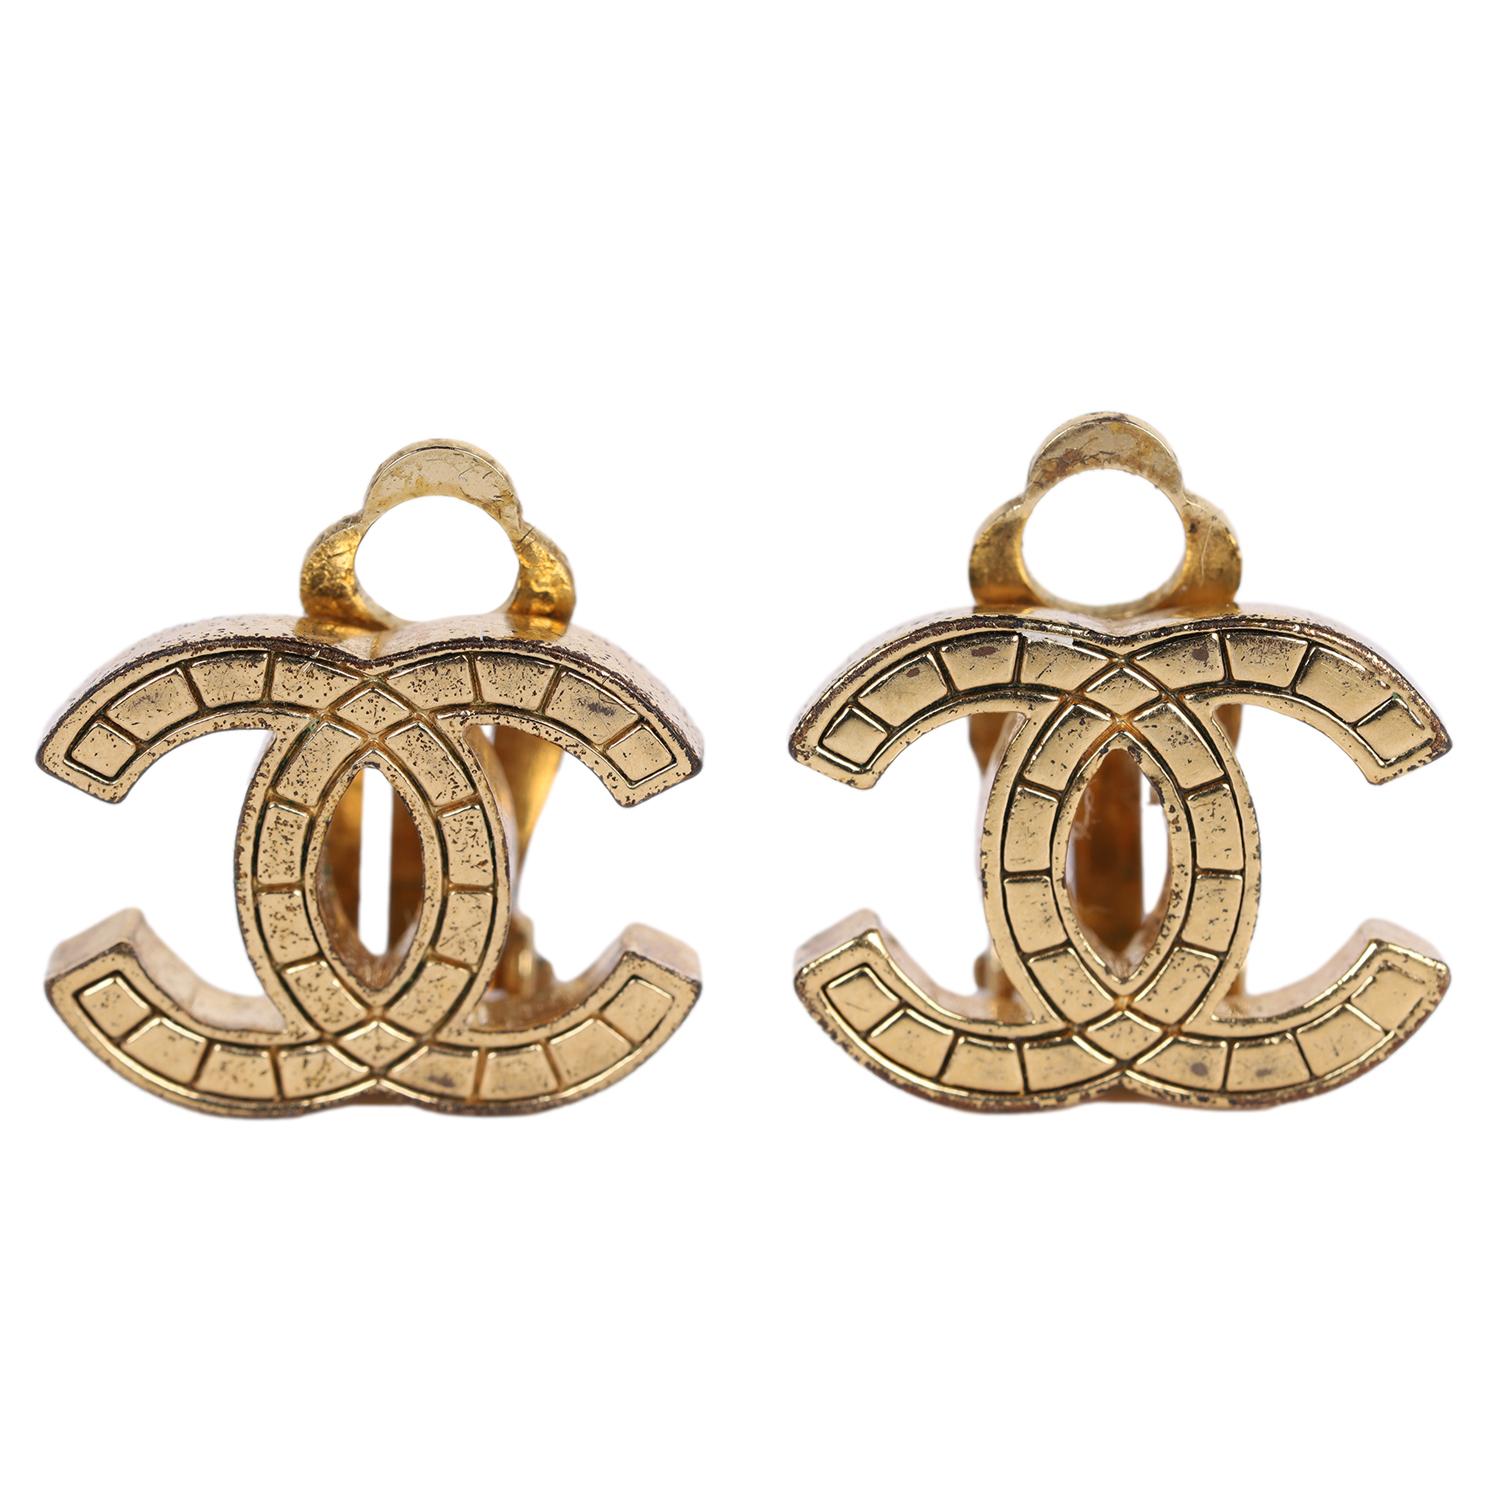 Authentic, pre-loved vintage Chanel CC gold clip on earrings. These are classic vintage earrings by Chanel that you will love! Ultra rare investment piece.

Made in France

0.6